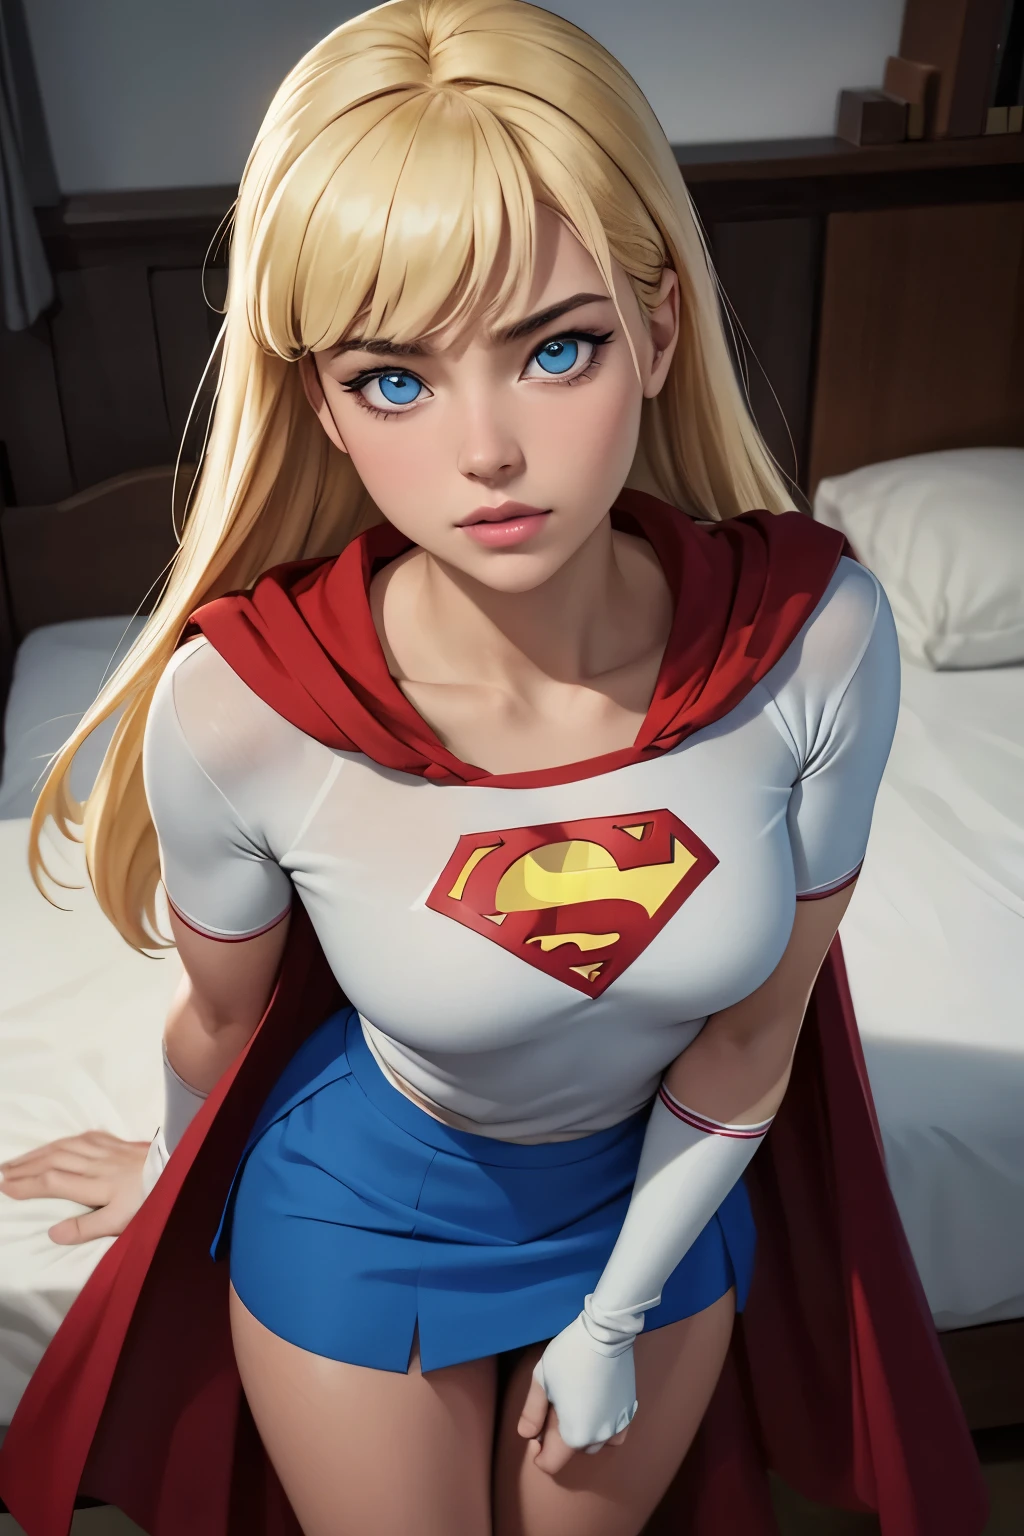 work of art, cru, linda arte, professional artist, 8K, very highly detailed face, very detailed hair, 1 girl, Supergirl (hair blonde, long hair, hair elastic, blue colored eyes, mitts, red cloak, short and tight blue skirt, white  shirt), lying on her bed in the Watchtower, Panas, lust, excitado, blushful, your hands exploring your body, thinking about girlfriend, missing your lover, Camera from above, no label, No brand, perfectly dCRUn body, beautiful  face, very detailedeyes, rosy cheeks, details Intricate in eyes, pursed lips, perfect shape body, Body cute, extremely detaild, details Intricate, highy detailed, Spitz focus, skin detailed, realistic skin texture, texture, detailedeyes, high resolution, kodak vision color, photoshot_\(ultra\), Post-processing, maximum detail, roughness, real-life, ultra realistic, pPanasorealism, pPanasography, absurderes, RAW pPanaso, highest quallity, high detail RAW color pPanaso, professional pPanaso, extremely detaild UHD 8K wallpaper unit, best qualityer, high resolution, (work of art, maximum quality, high resolution:1.4), pPanaso, cinematic, Film grain, Spitz, soft natural light, magic pPanasography, super verbose